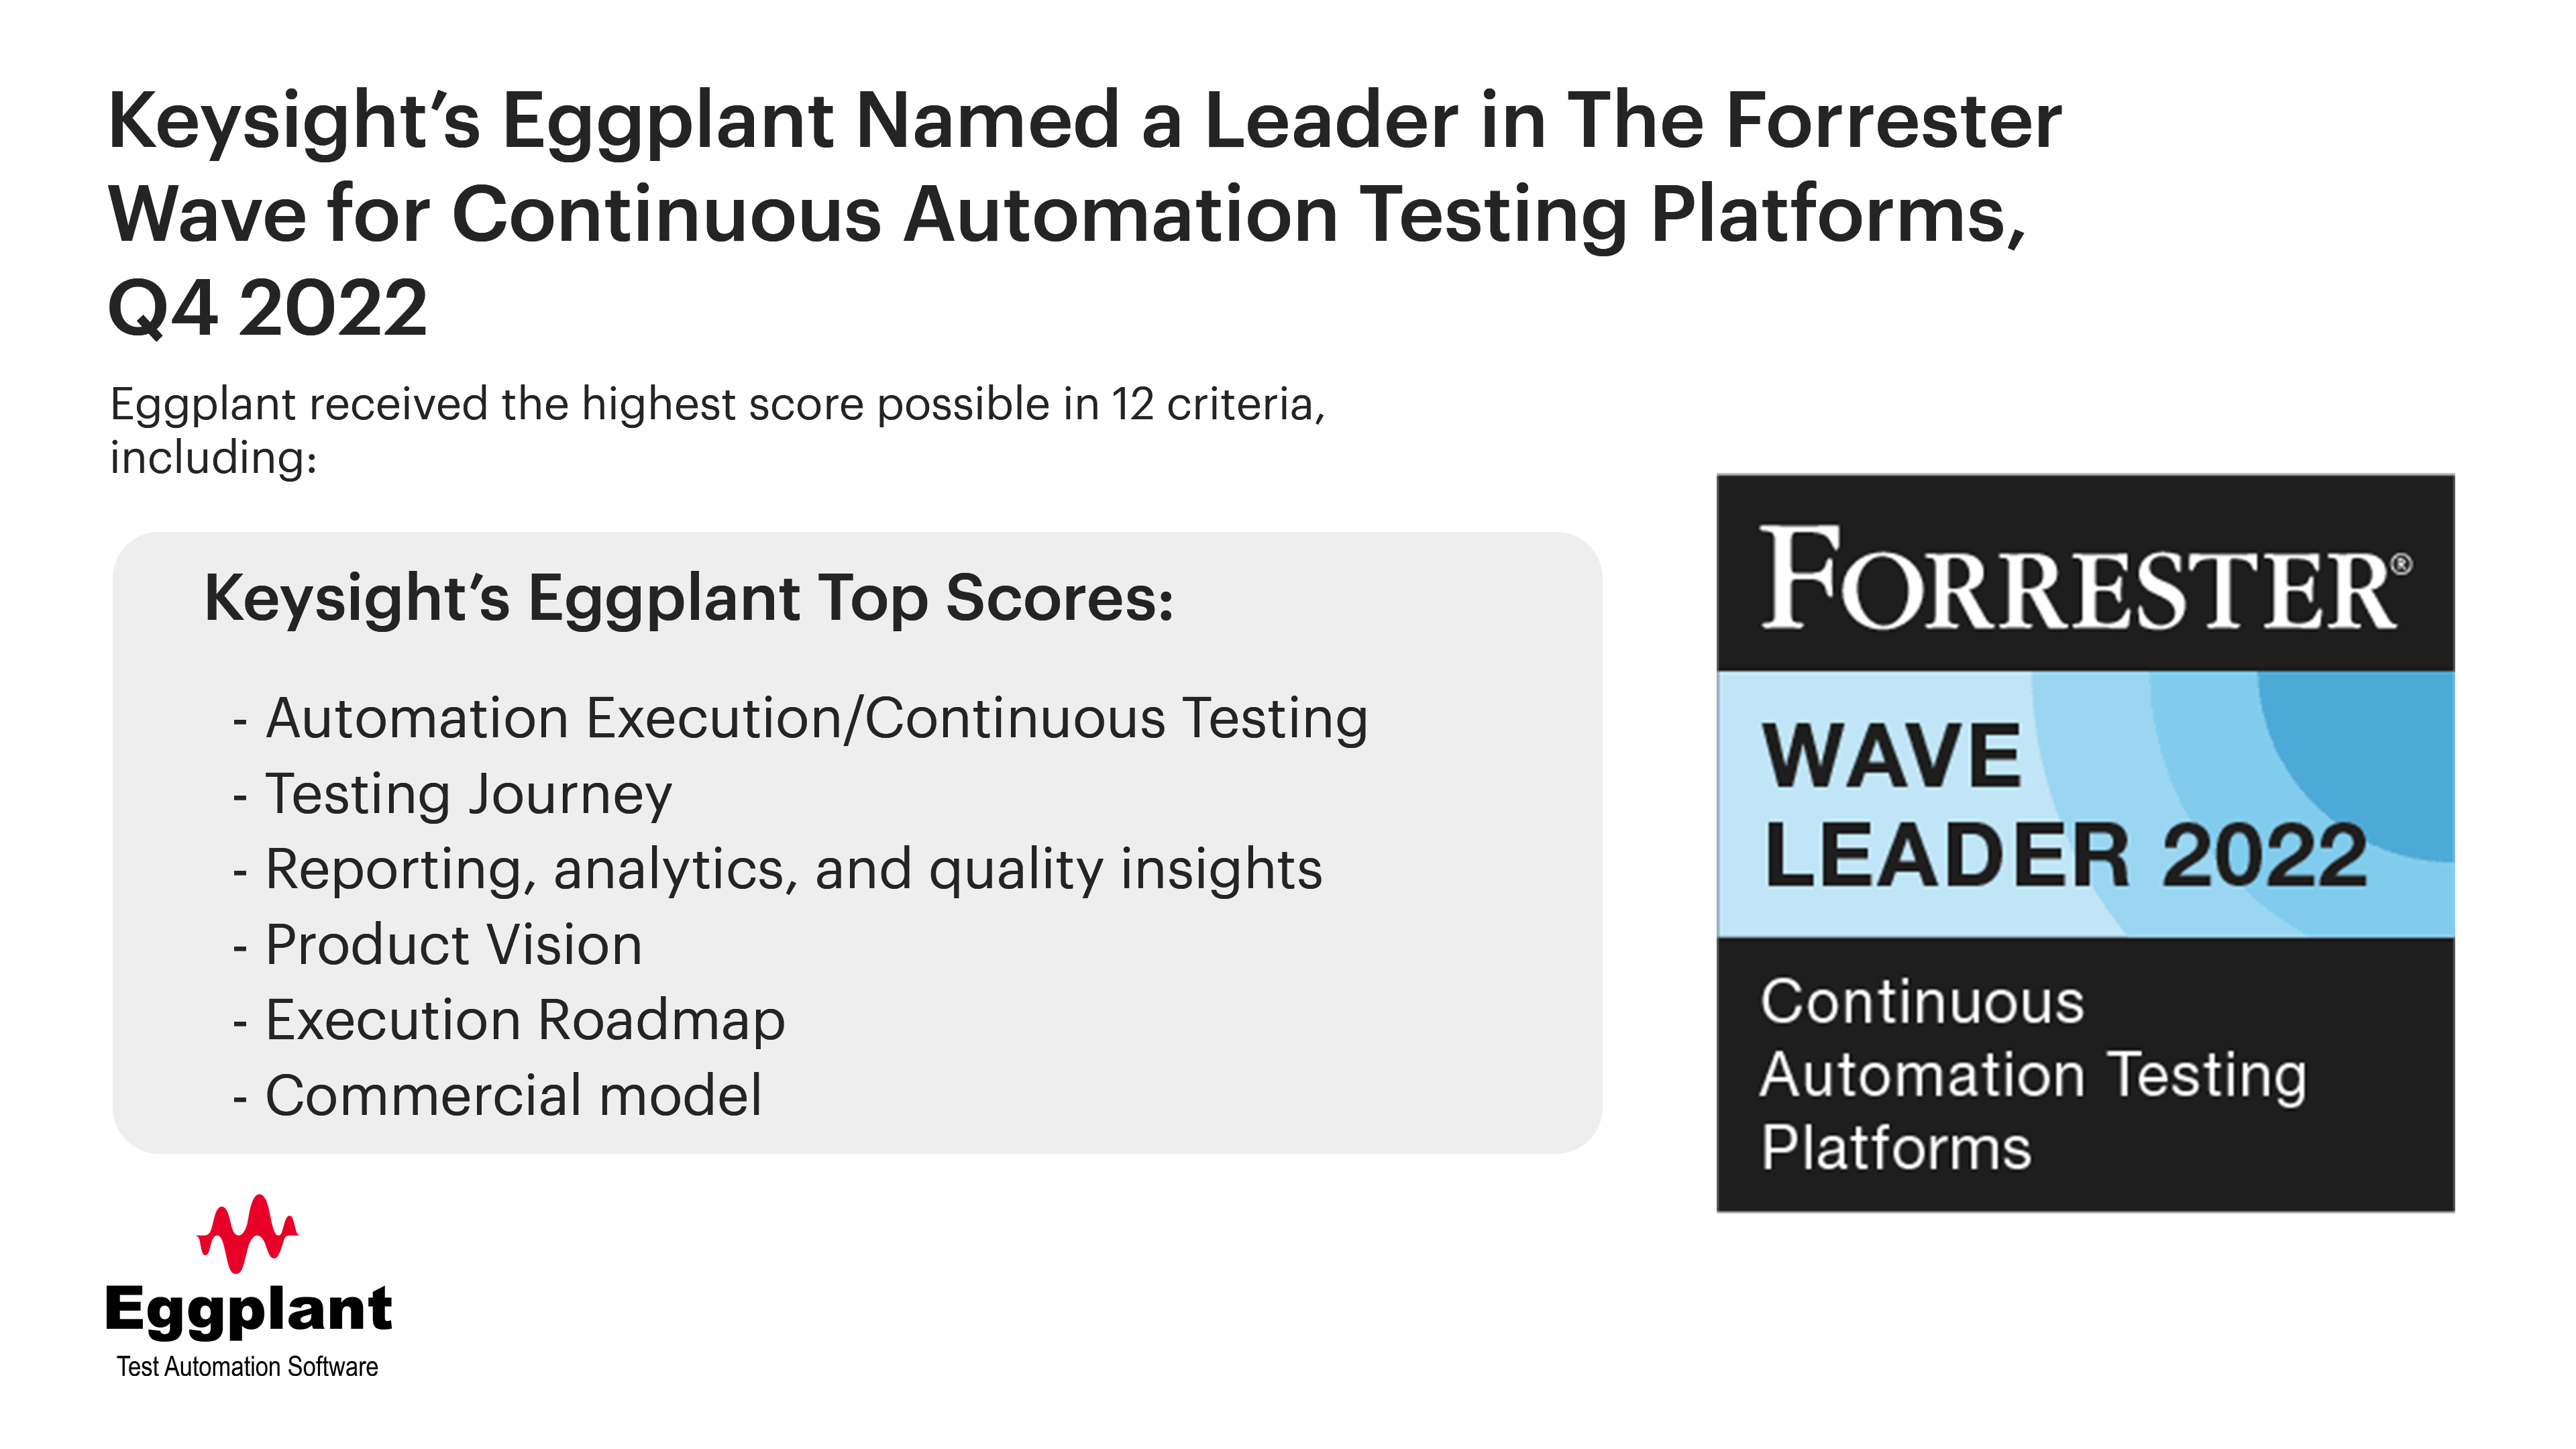 Keysight's Eggplant named a Leader in Continuous Automation Testing Platforms